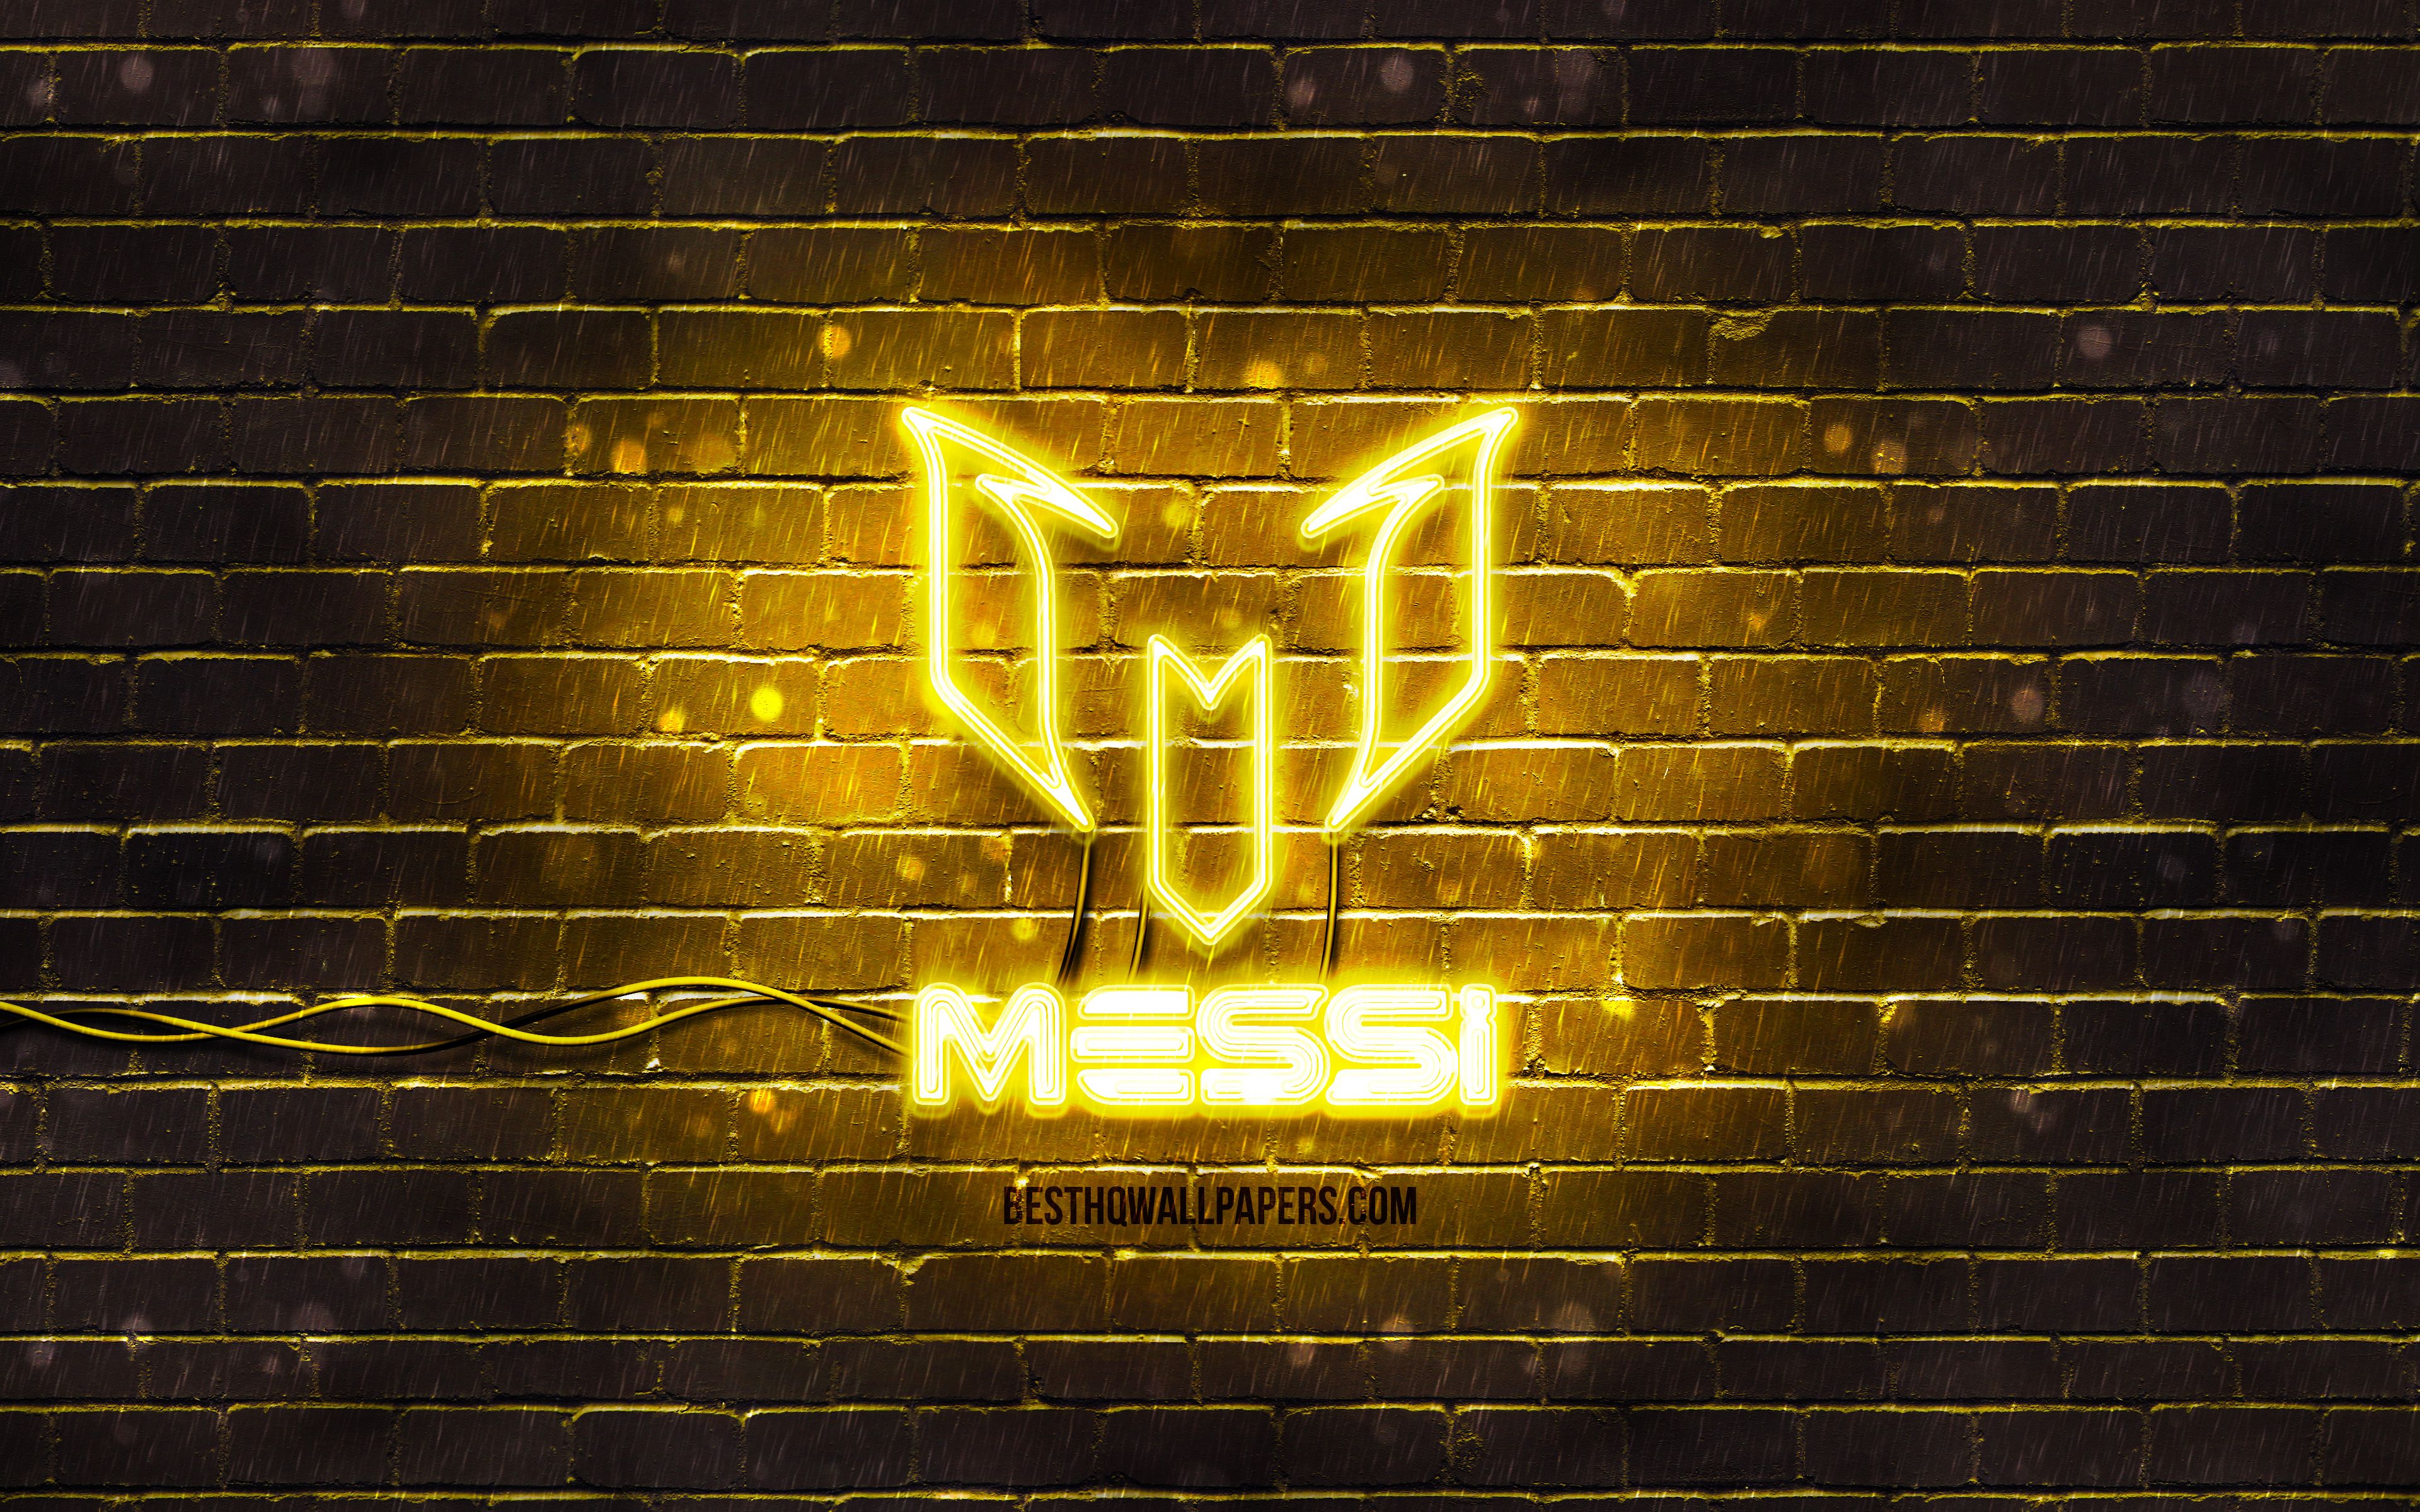 Download wallpaper Lionel Messi yellow logo, 4k, yellow brickwall, Leo Messi, fan art, Lionel Messi logo, football stars, Lionel Messi neon logo, Lionel Messi for desktop with resolution 3840x2400. High Quality HD